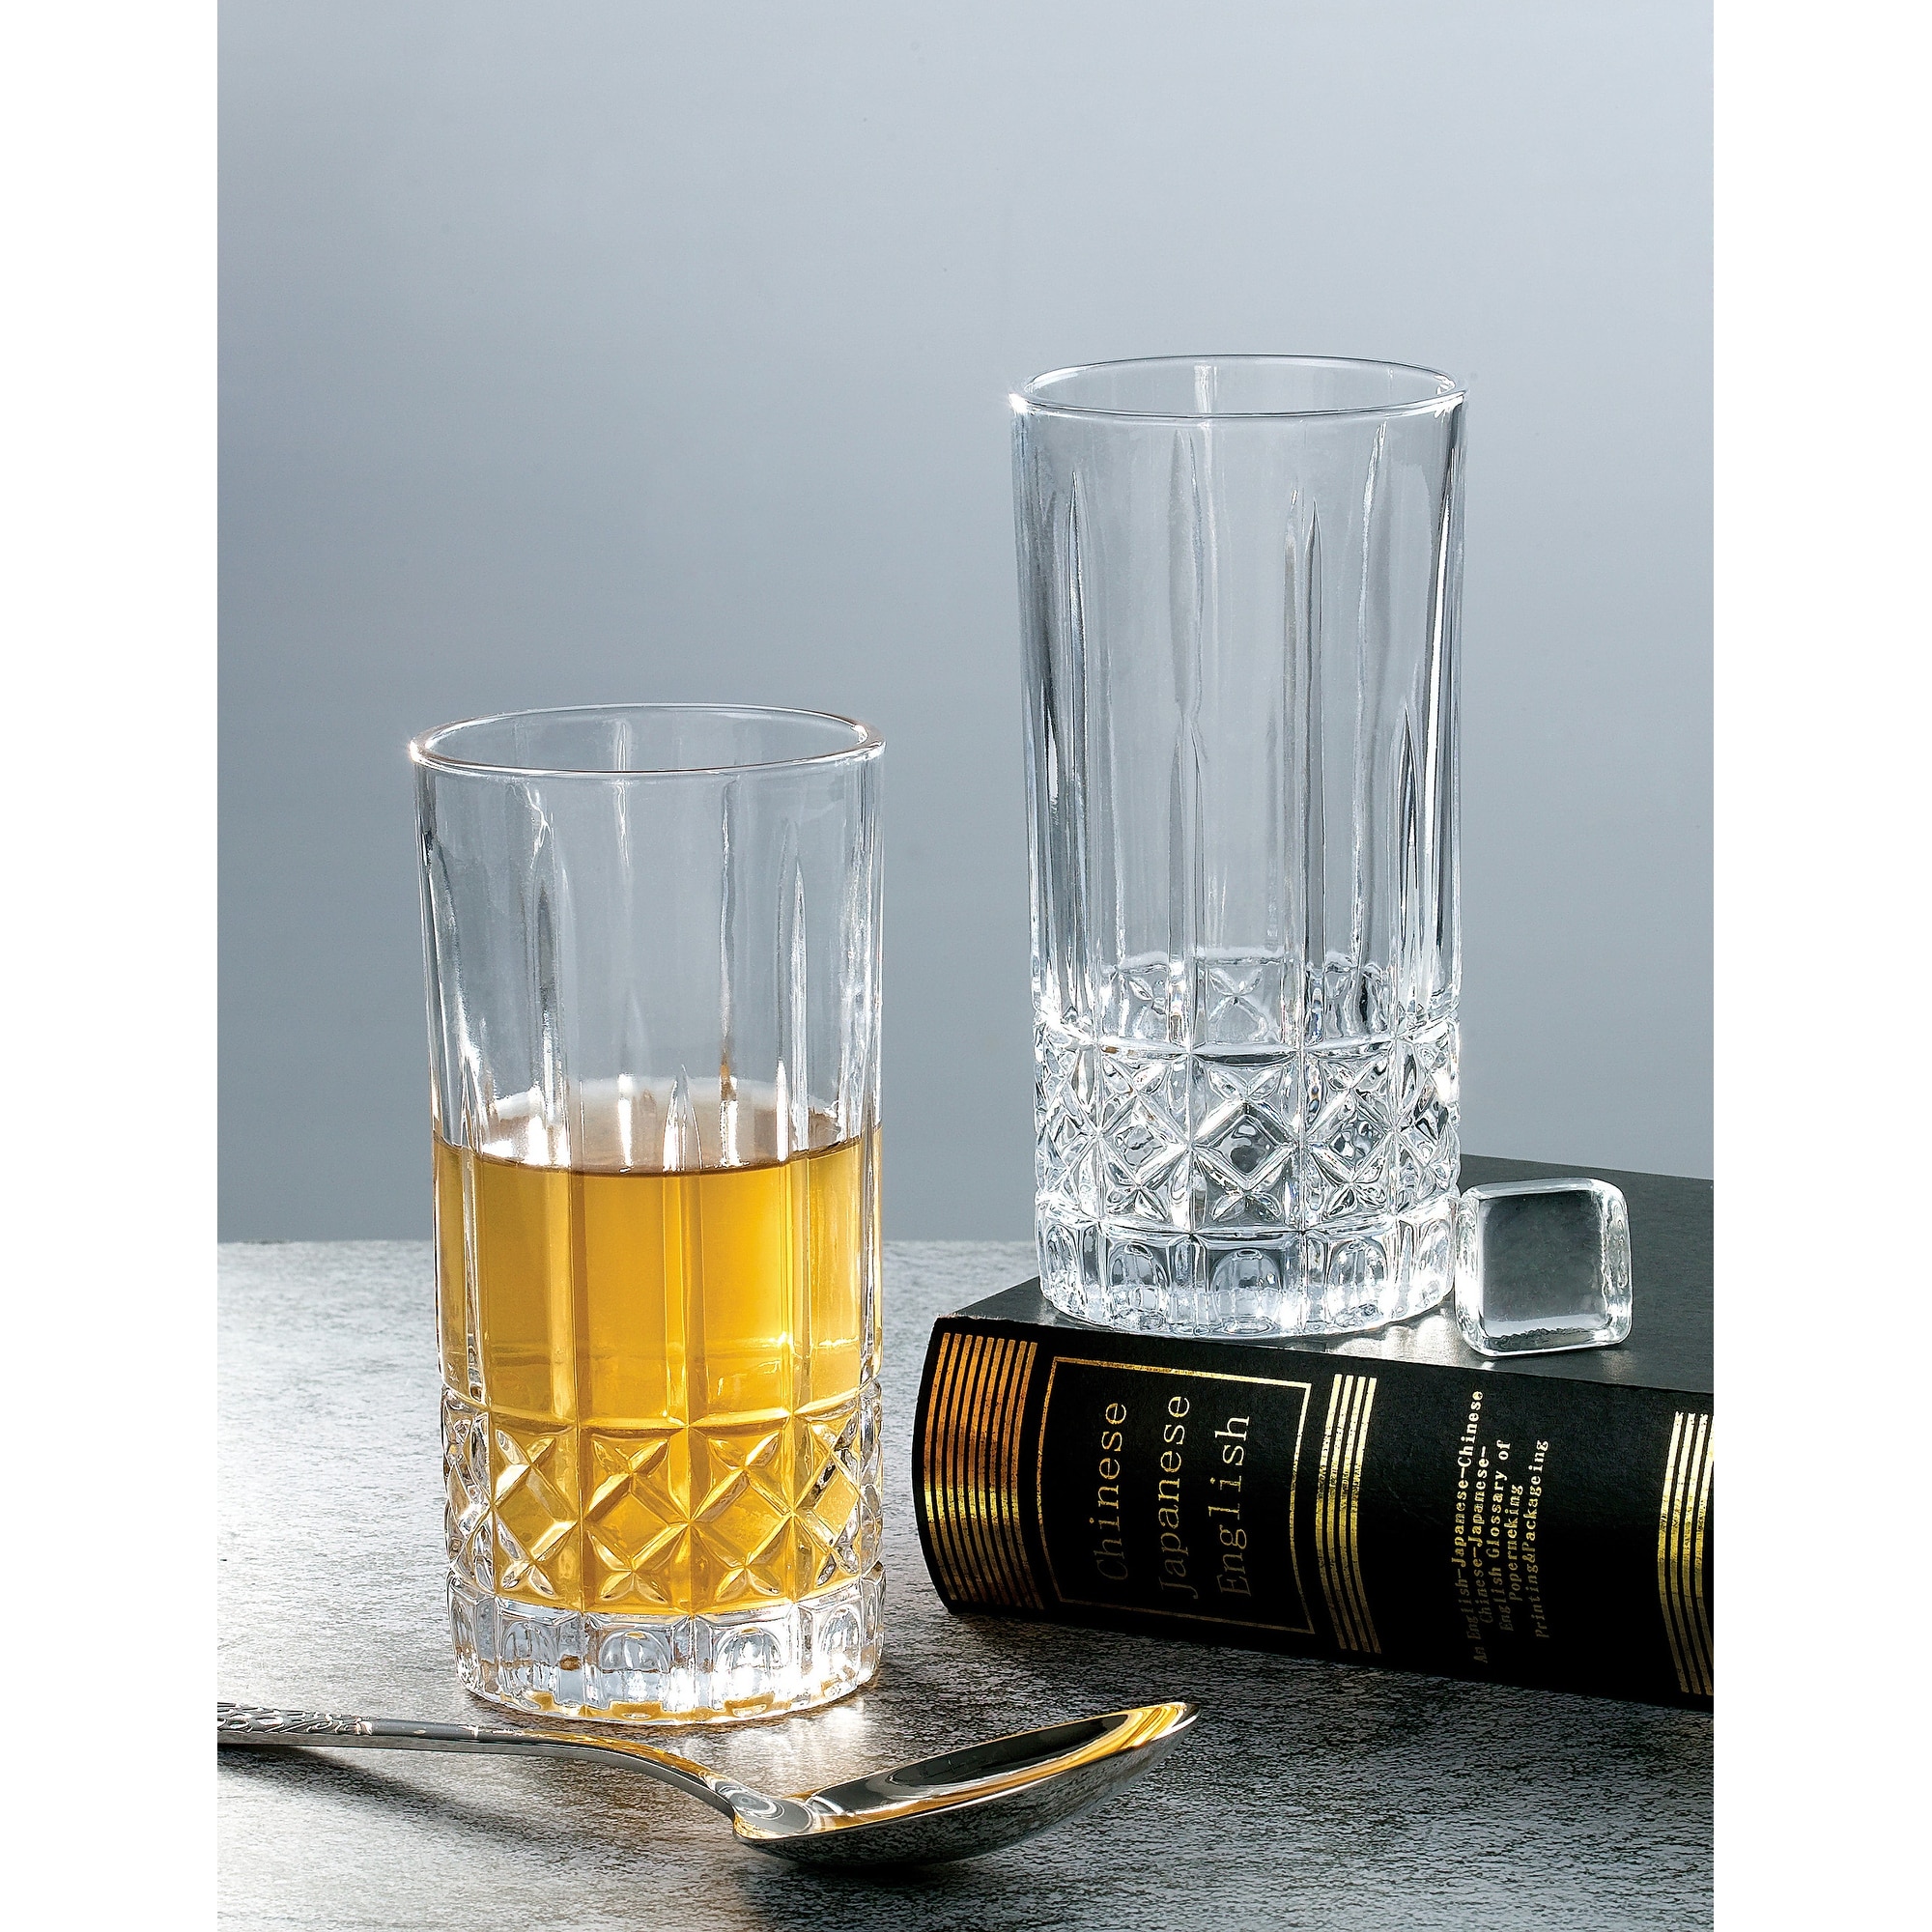 https://ak1.ostkcdn.com/images/products/is/images/direct/299c5780d443be26668a37c893e6fe77297a0a15/Lorren-Home-Trends-12-OZ.-Drinking-Glass-Textured-Cut-Glass%2C-Set-of-6.jpg